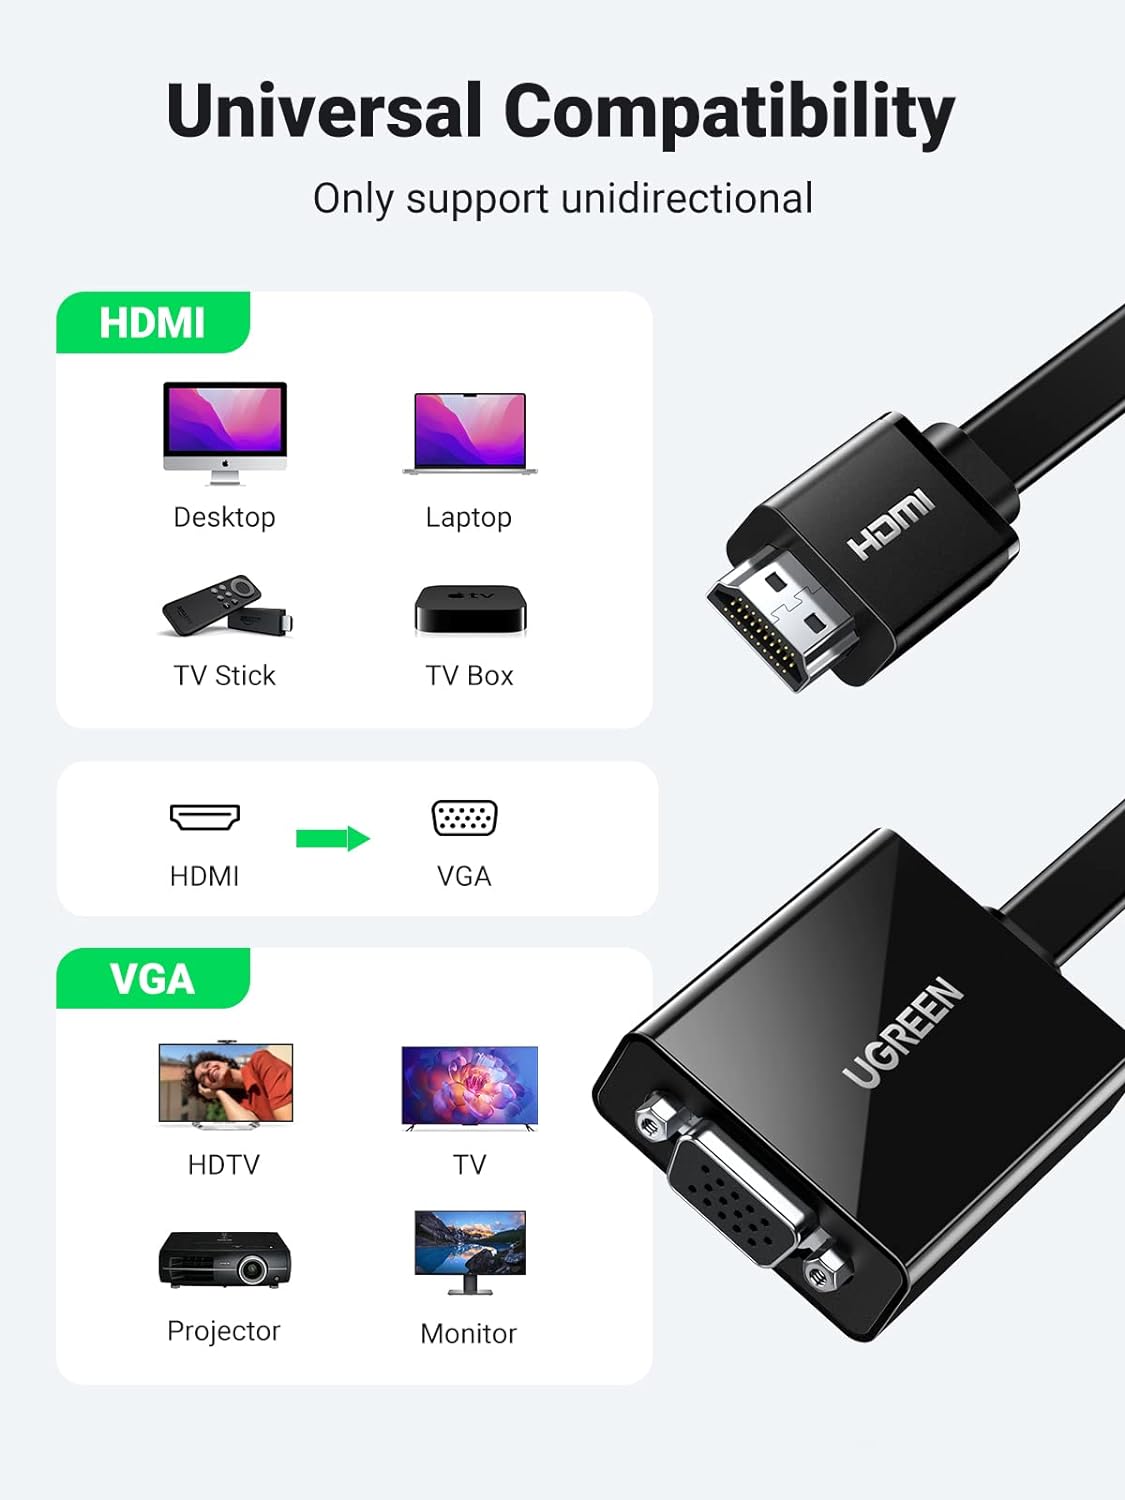 Ugreen Active HDMI to VGA Adapter Converter with 3.5 mm Audio Jack up to 1920 * 1080@60Hz for PC, Laptop, Ultrabook, Raspberry Pi, Chromebook (Black)